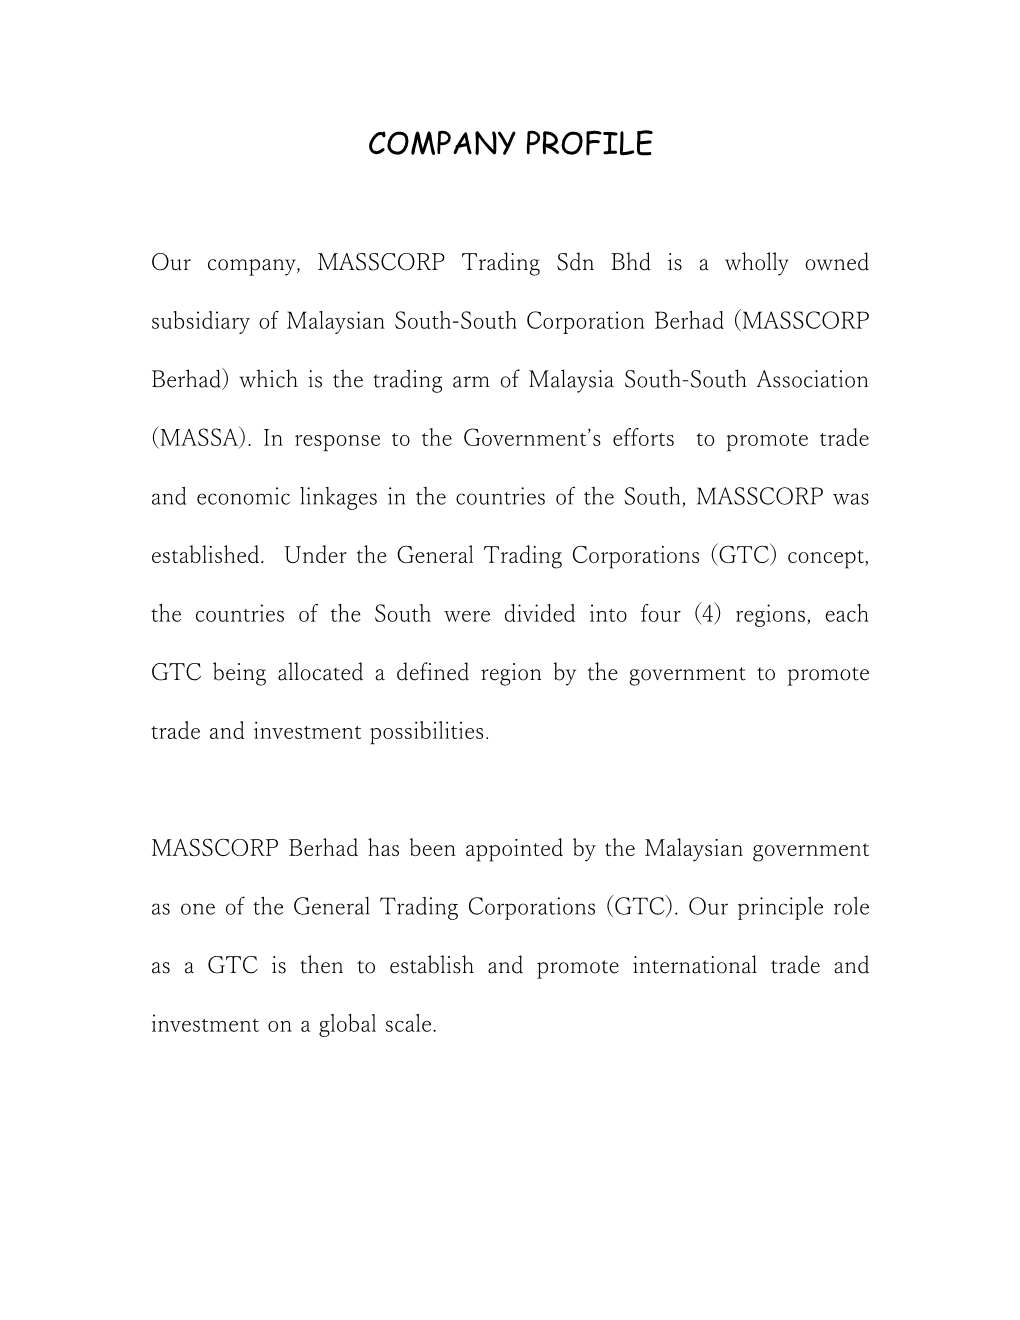 Our Company, MASSCORP Trading Sdn Bhd Is a Wholly Owned Subsidiary of Malaysian South-South